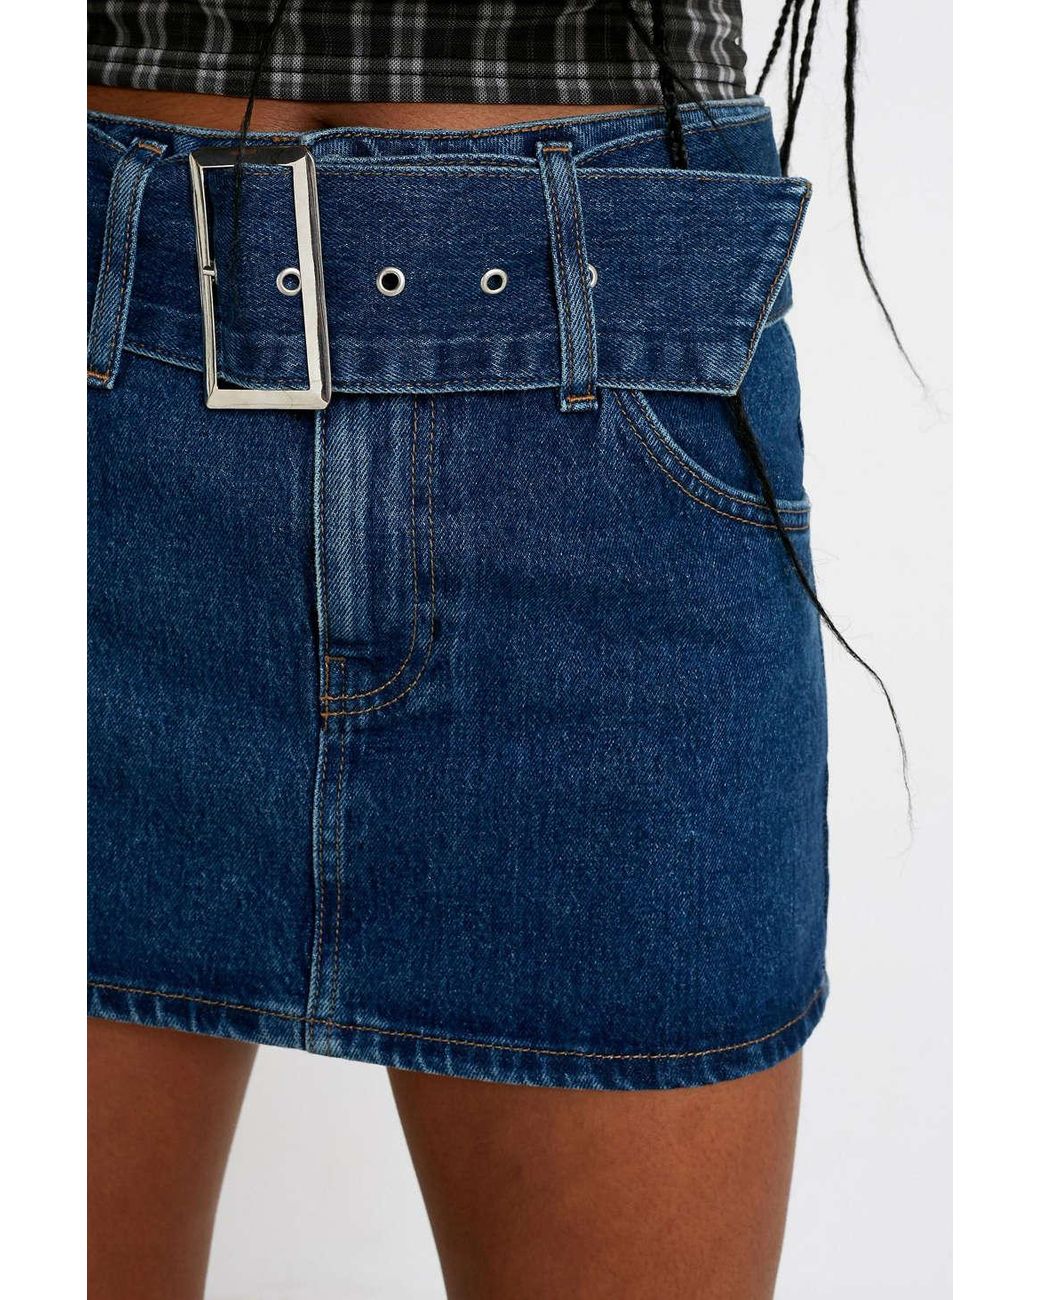 Urban Outfitters Uo Belted Denim Super Mini Skirt in Blue | Lyst